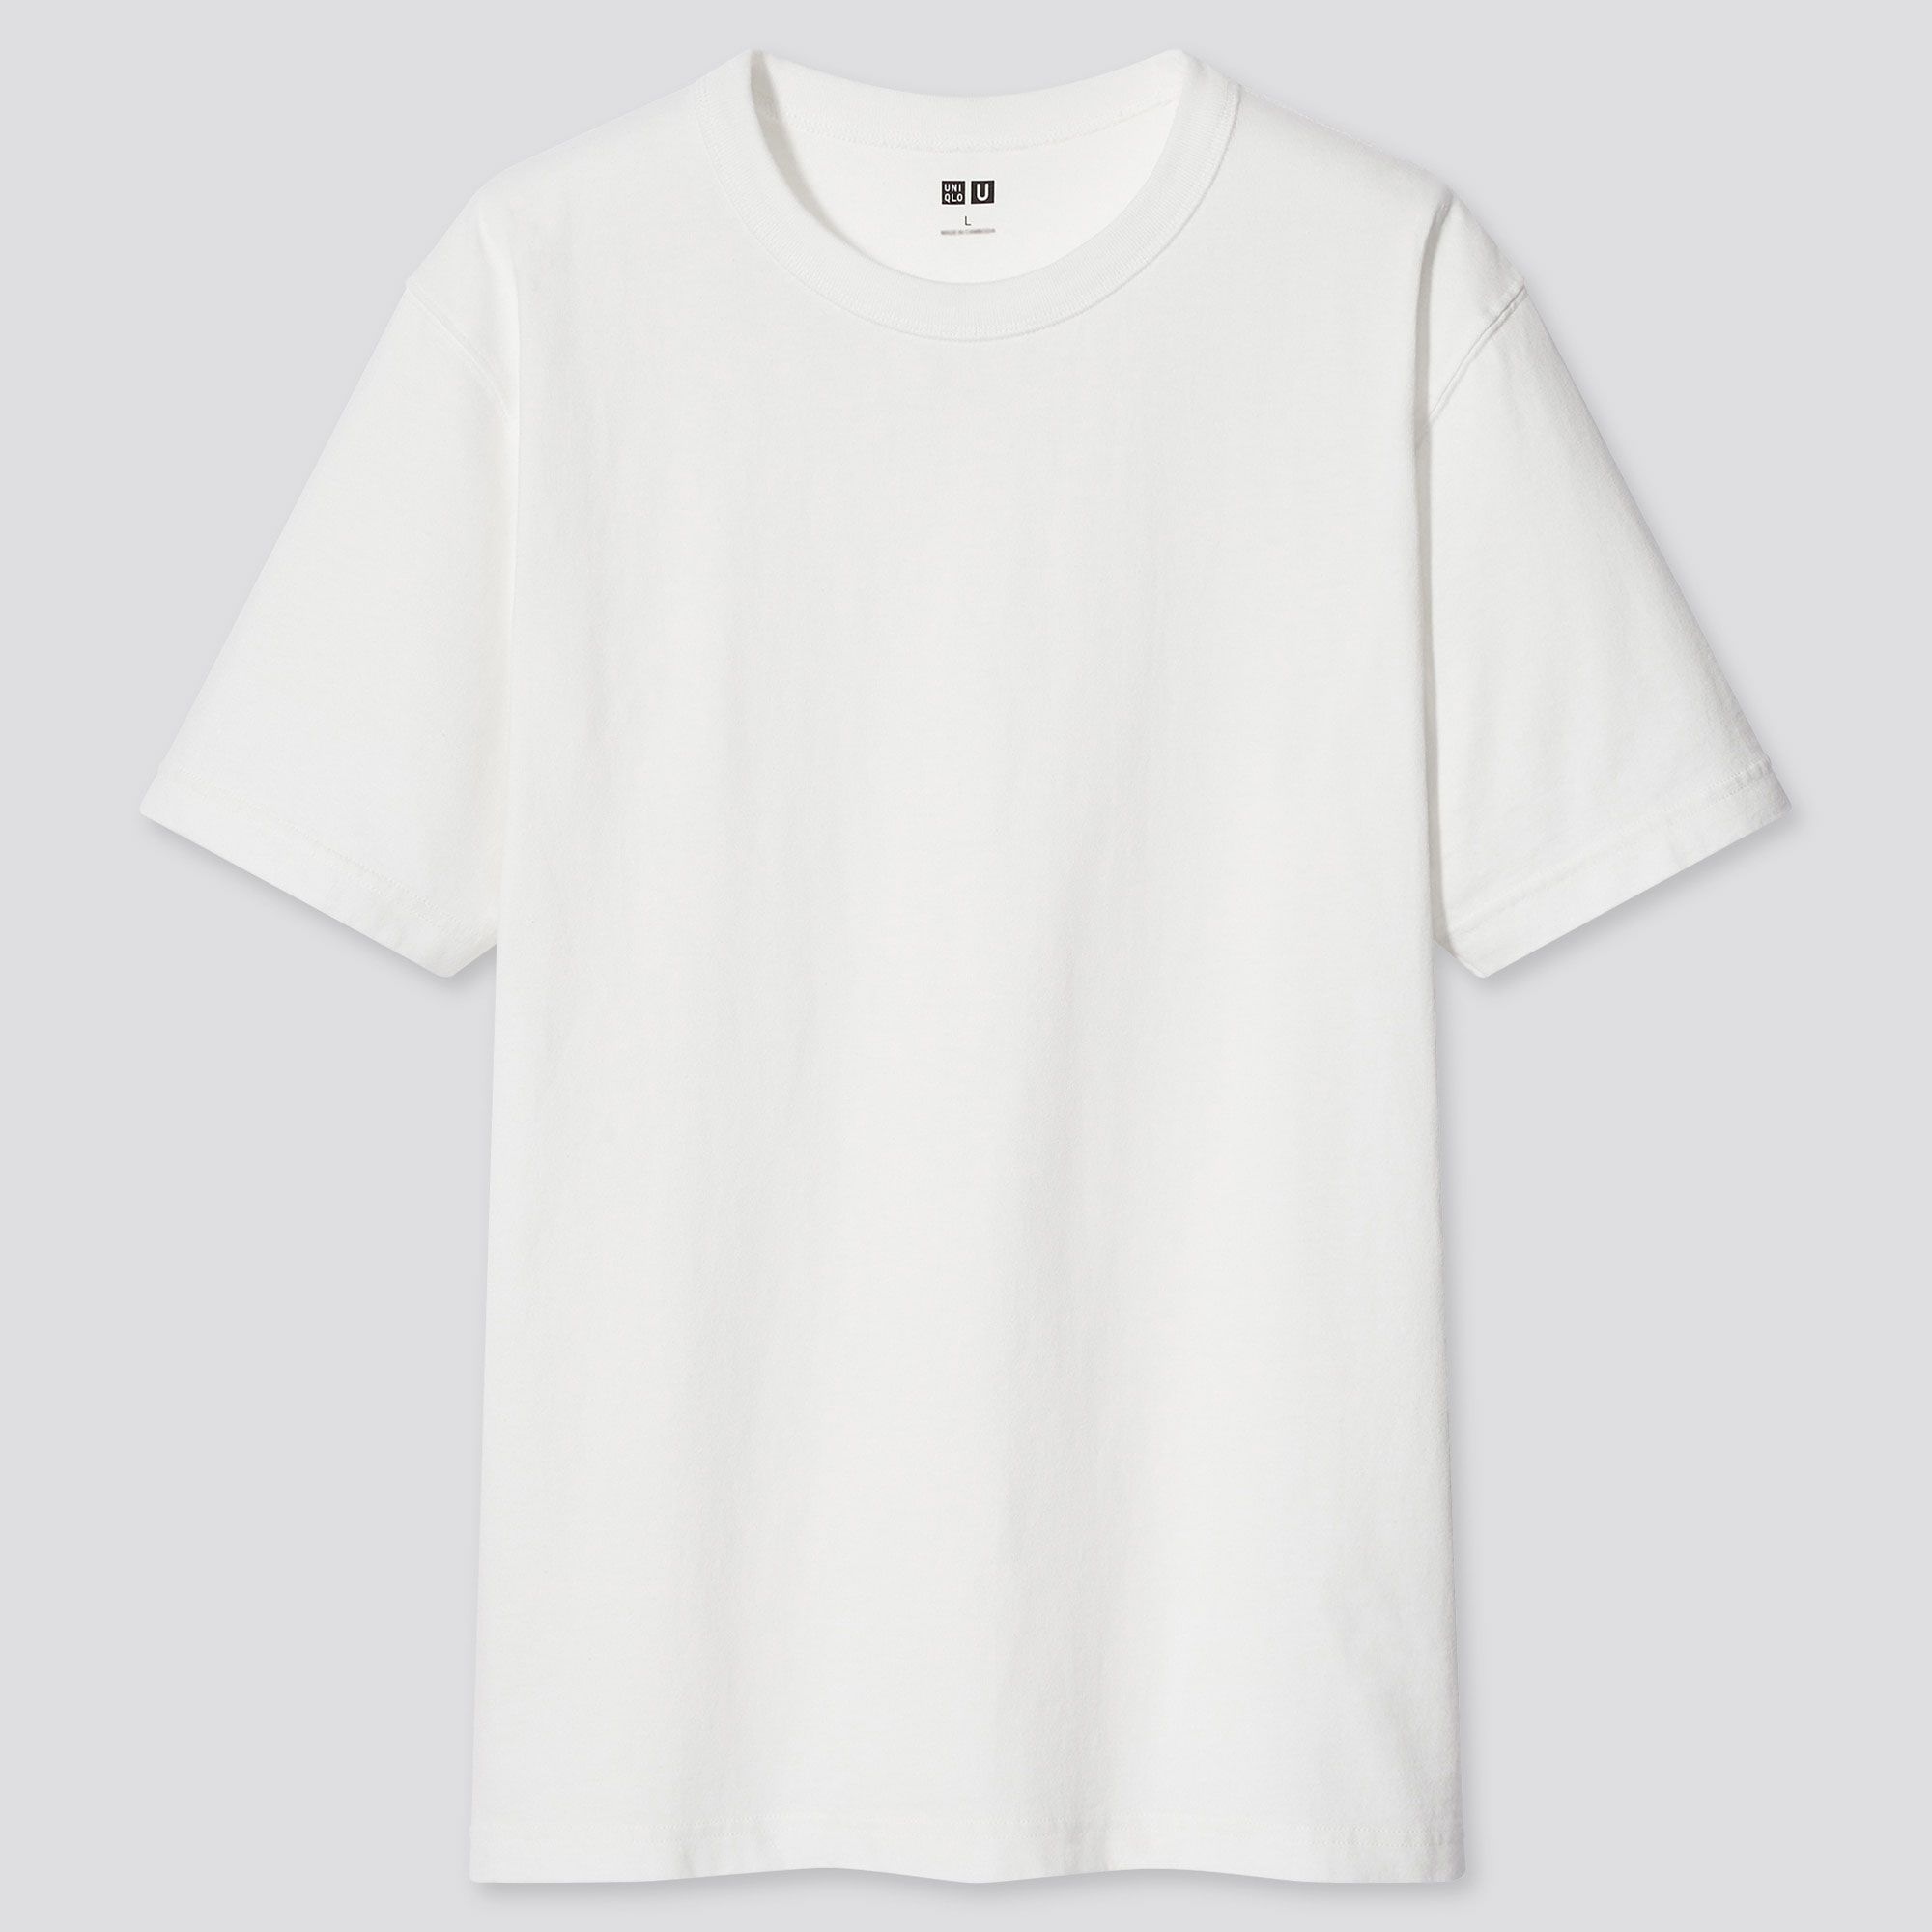 Buy > tight white shirts mens > in stock